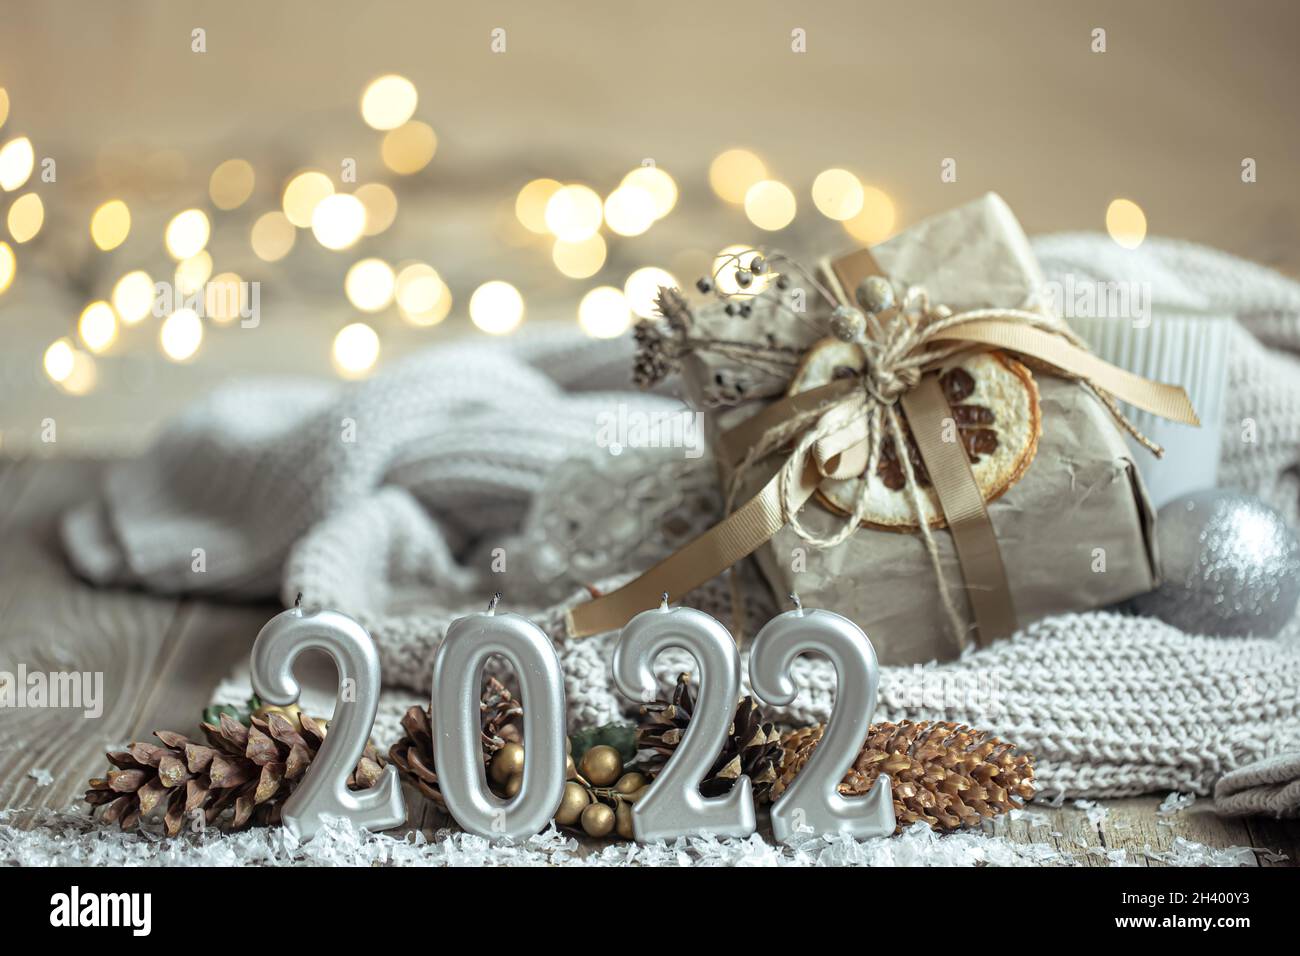 Cozy winter background with burning candles, decorative details